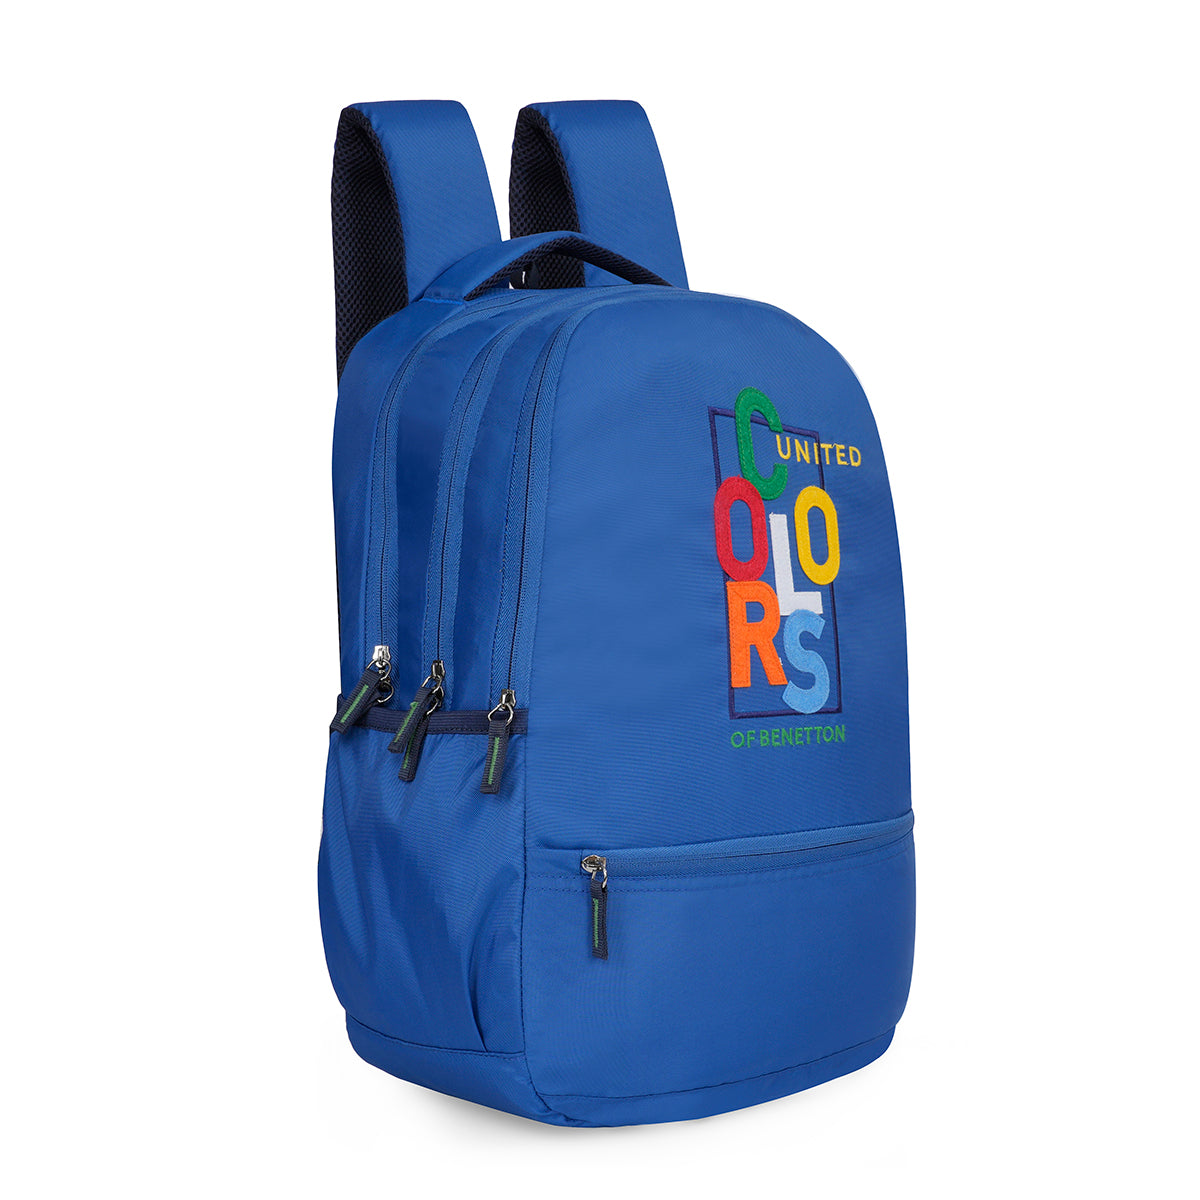 United Colors of Benetton Nyx Back to School Backpack Blue